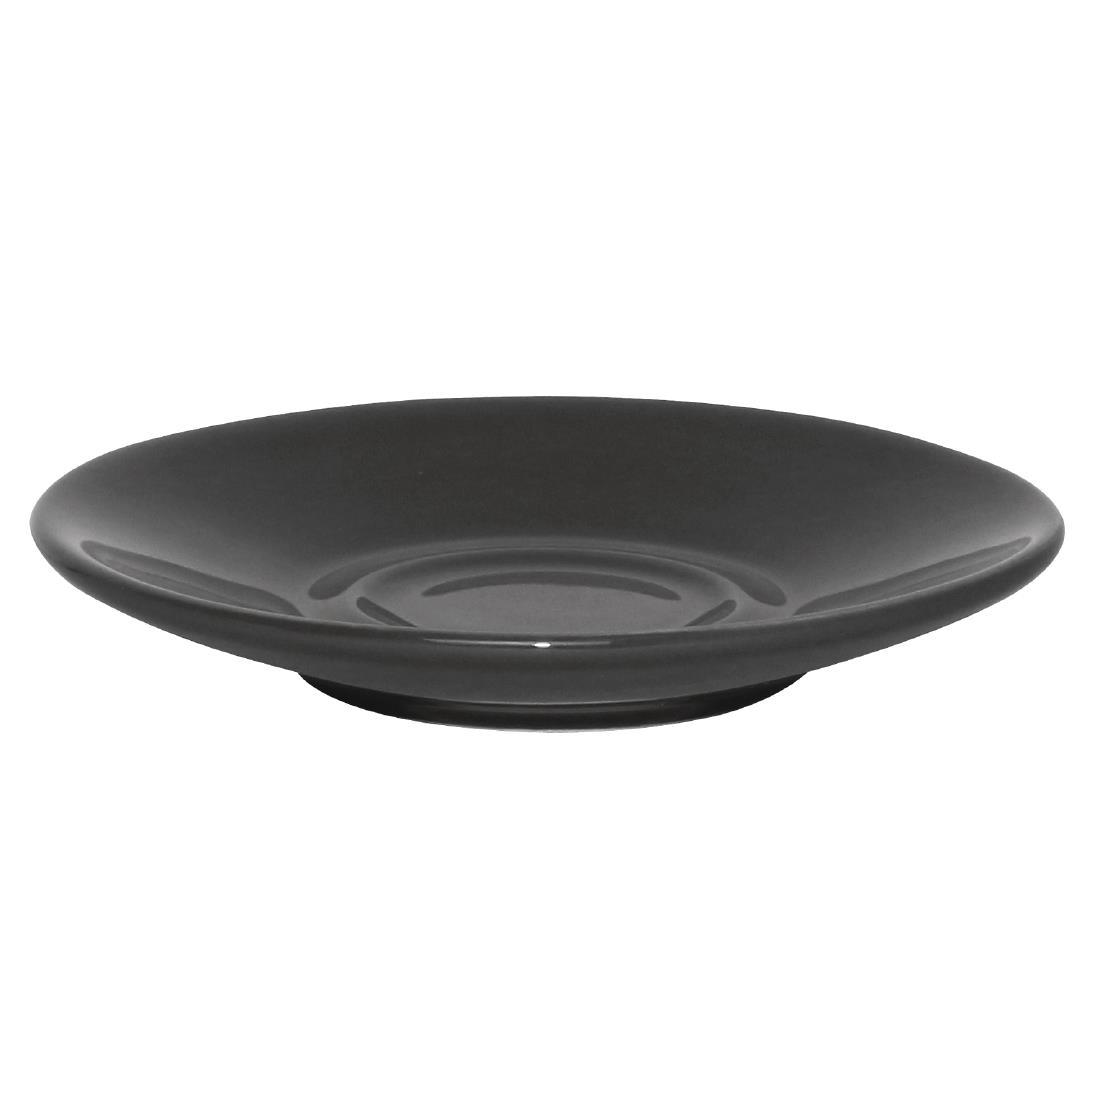 Olympia Cafe Espresso Saucers Charcoal 116.5mm (Pack of 12) - GK087  - 1